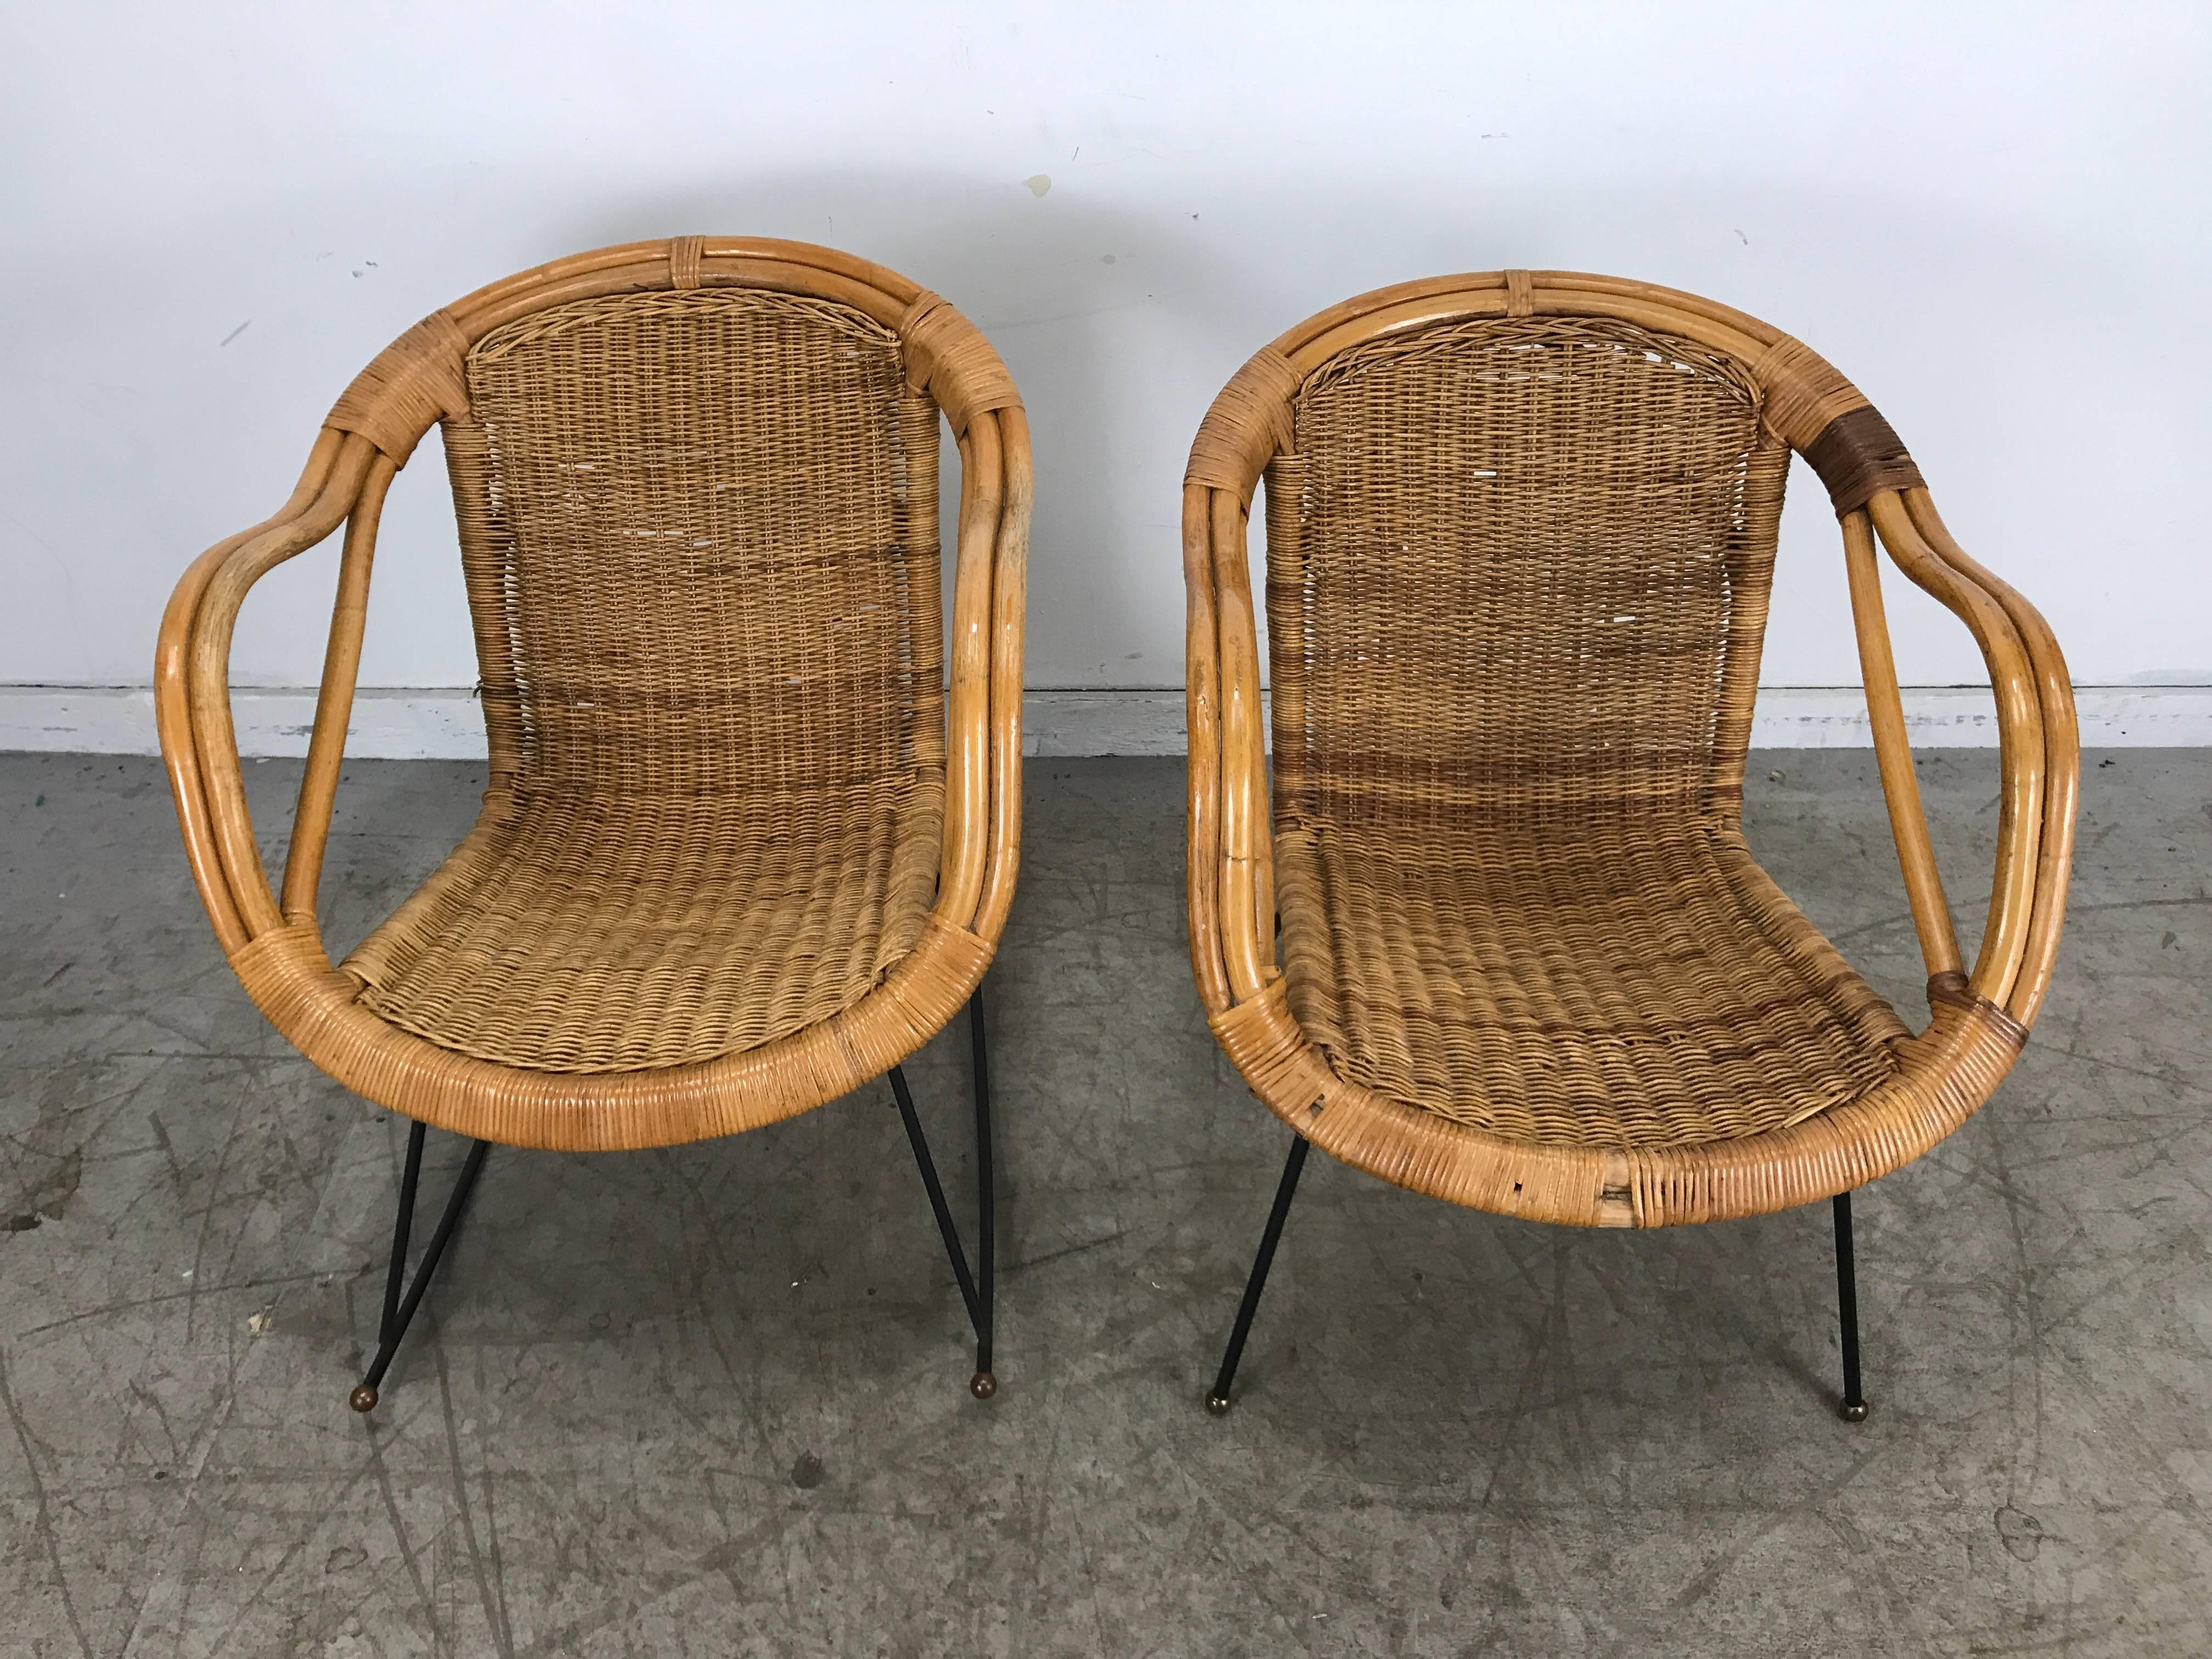 Pair of Mid-Century Modern wicker and iron lounge chairs, garden or patio. Classic modern design, extremely comfortable, structurally sound, sturdy. Hand delivery available to New York City or anywhere en route from Buffalo NY.